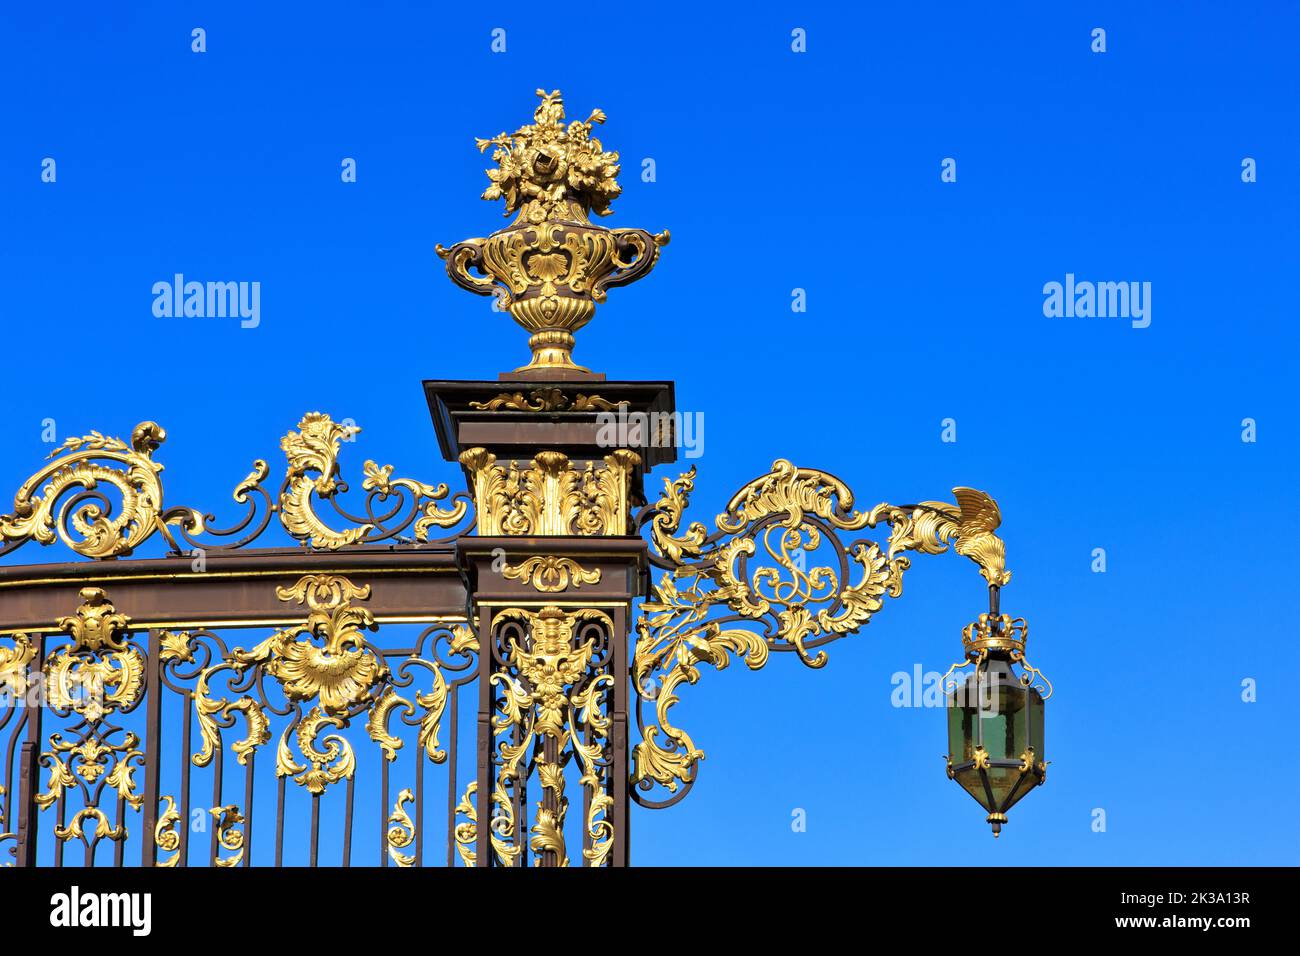 Close-up of the gilded decorations on one of the wrought iron gates with lantern at Place Stanislas in Nancy (Meurthe-et-Moselle), France Stock Photo